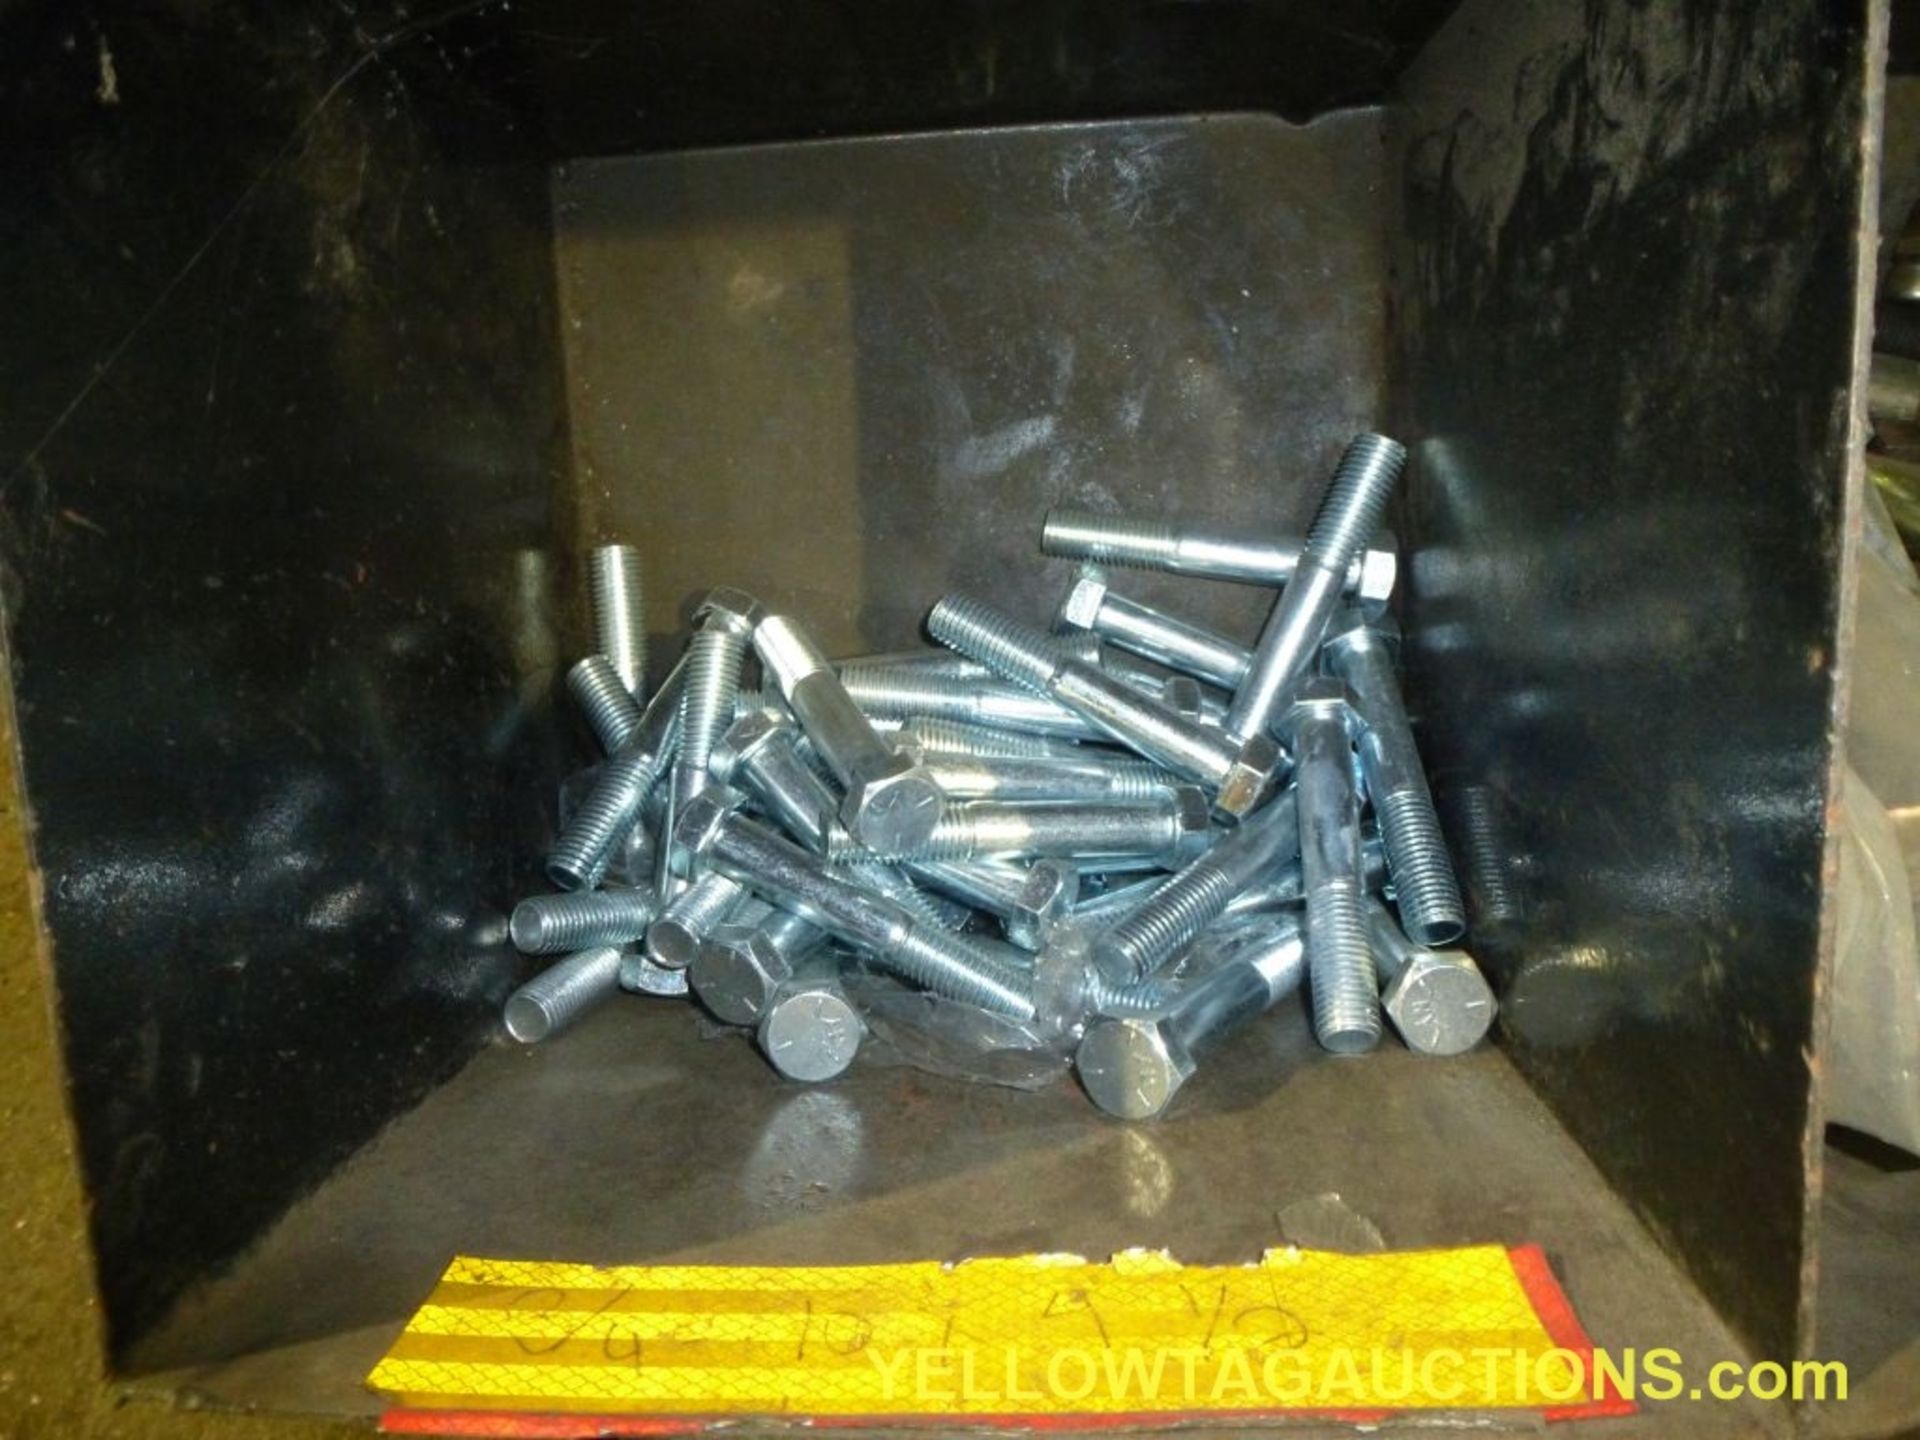 15-Bin Parts Shelf with Contents|Tag: 121 - Image 12 of 16